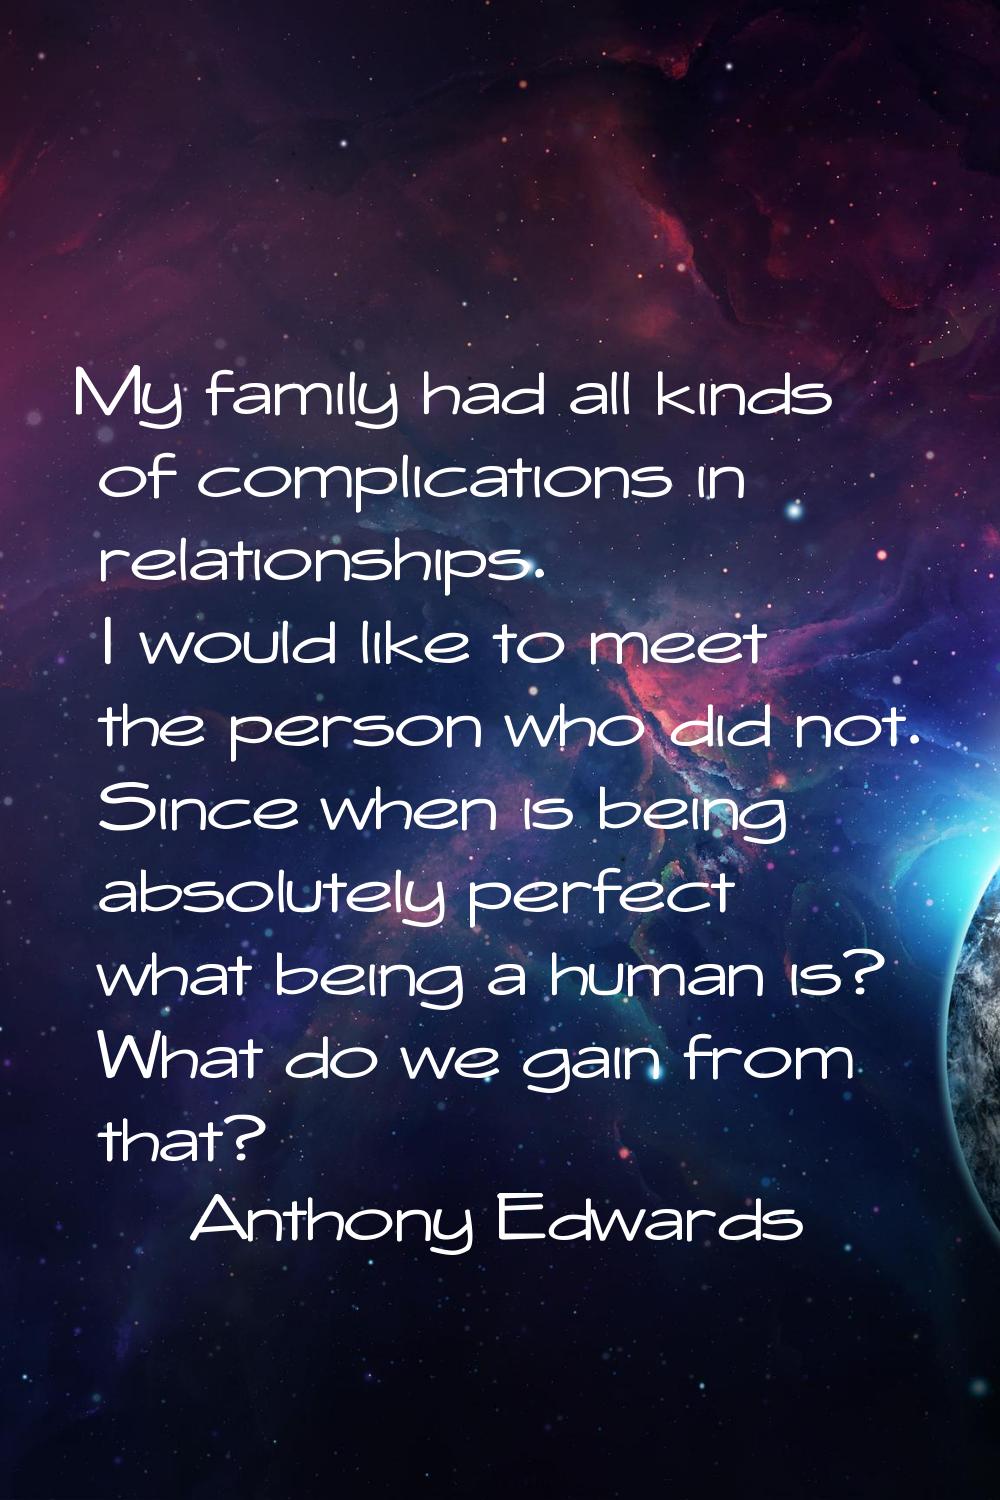 My family had all kinds of complications in relationships. I would like to meet the person who did 